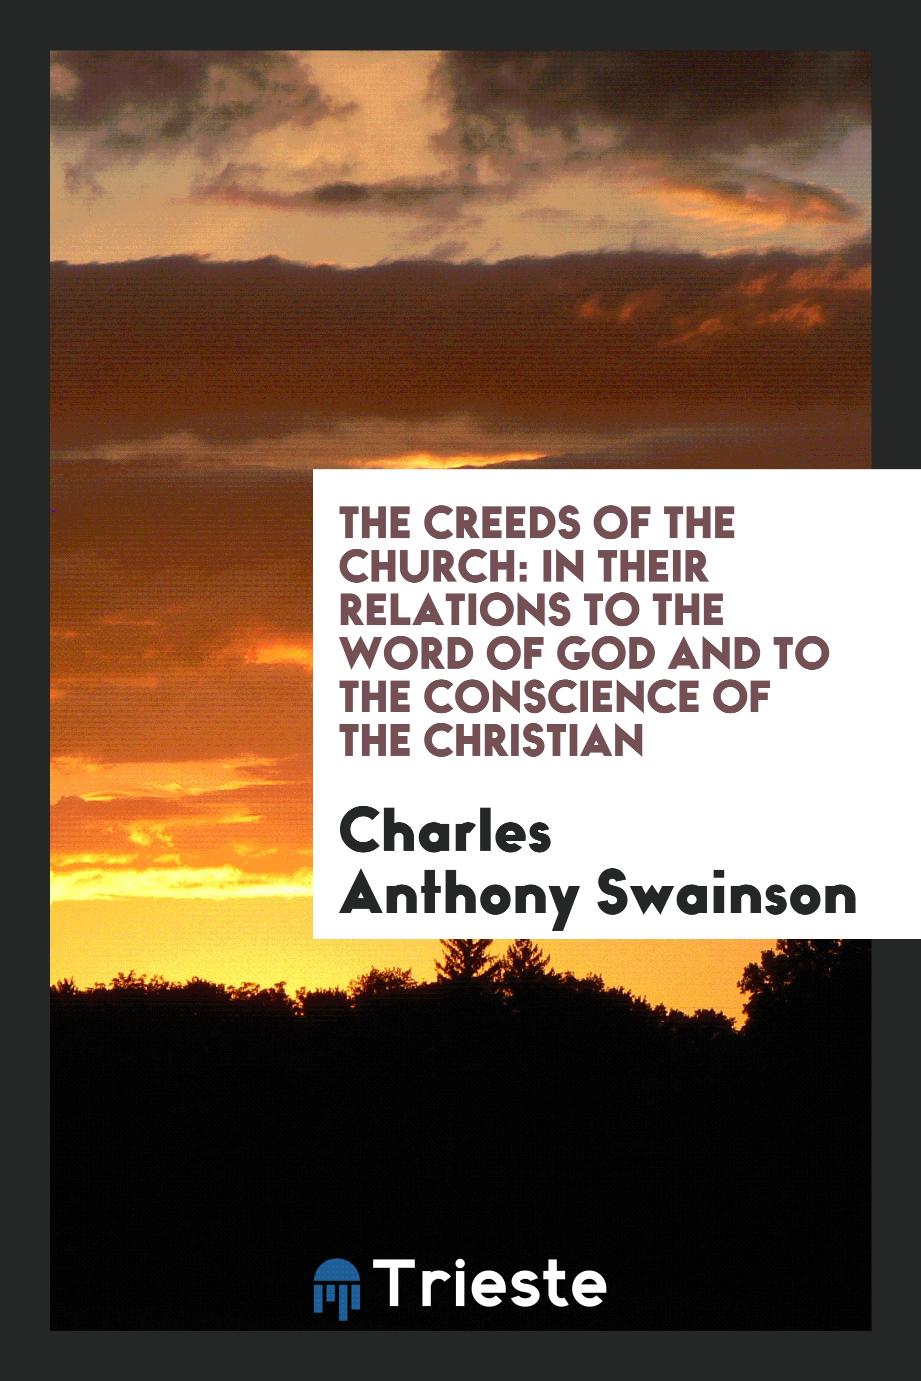 The creeds of the church: in their relations to the word of God and to the conscience of the Christian